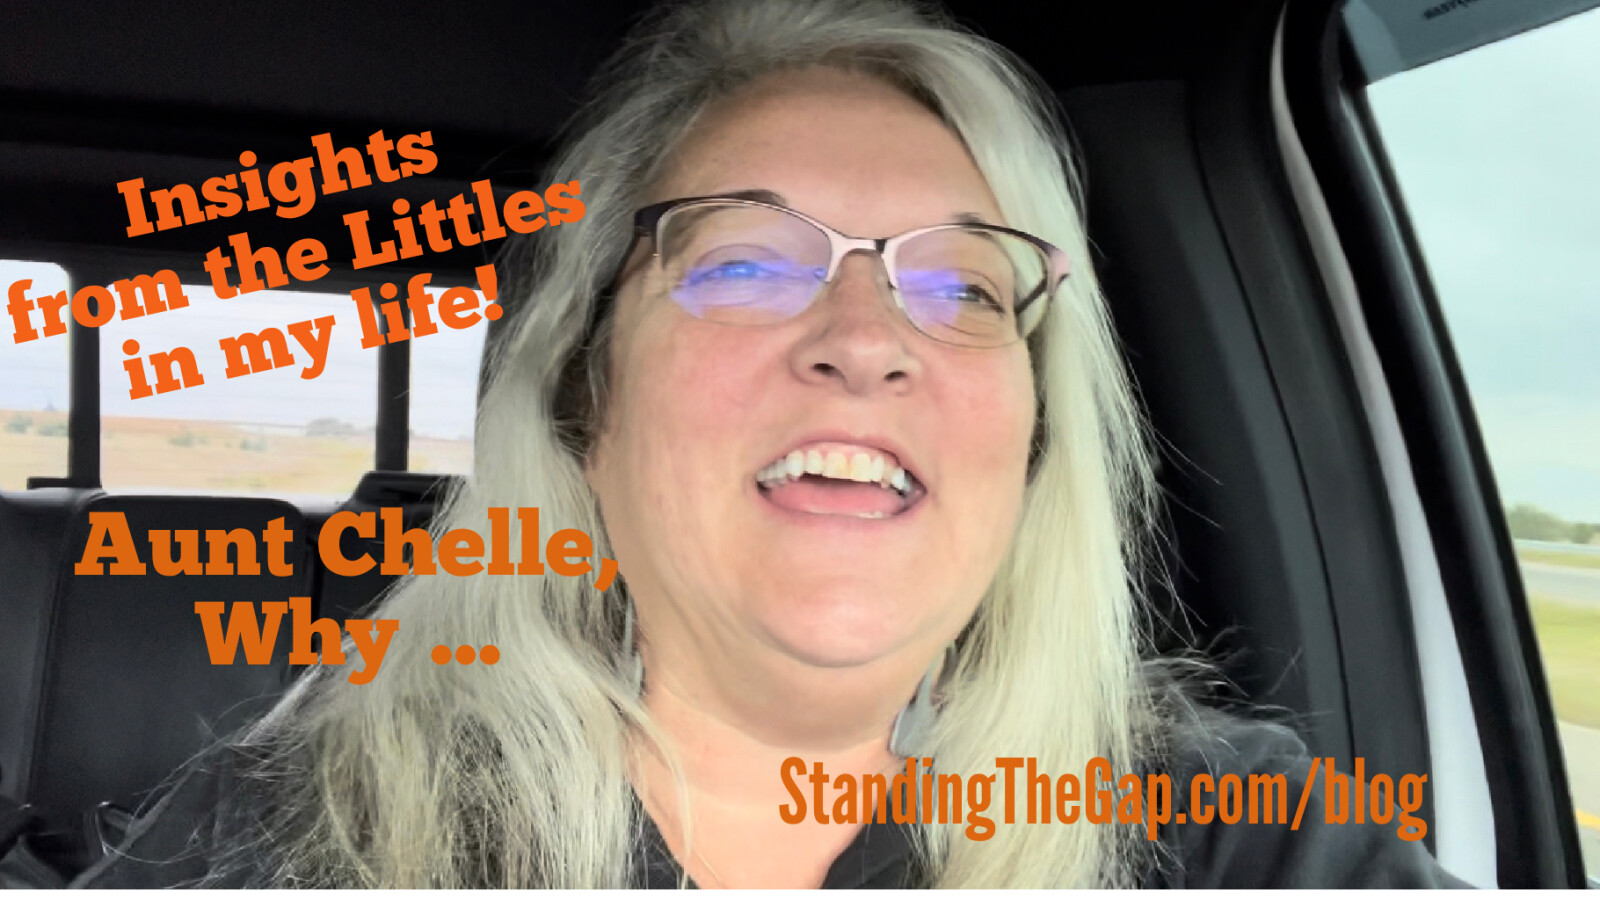 Aunt Chelle, Why …   Insights from the Littles in my life! 